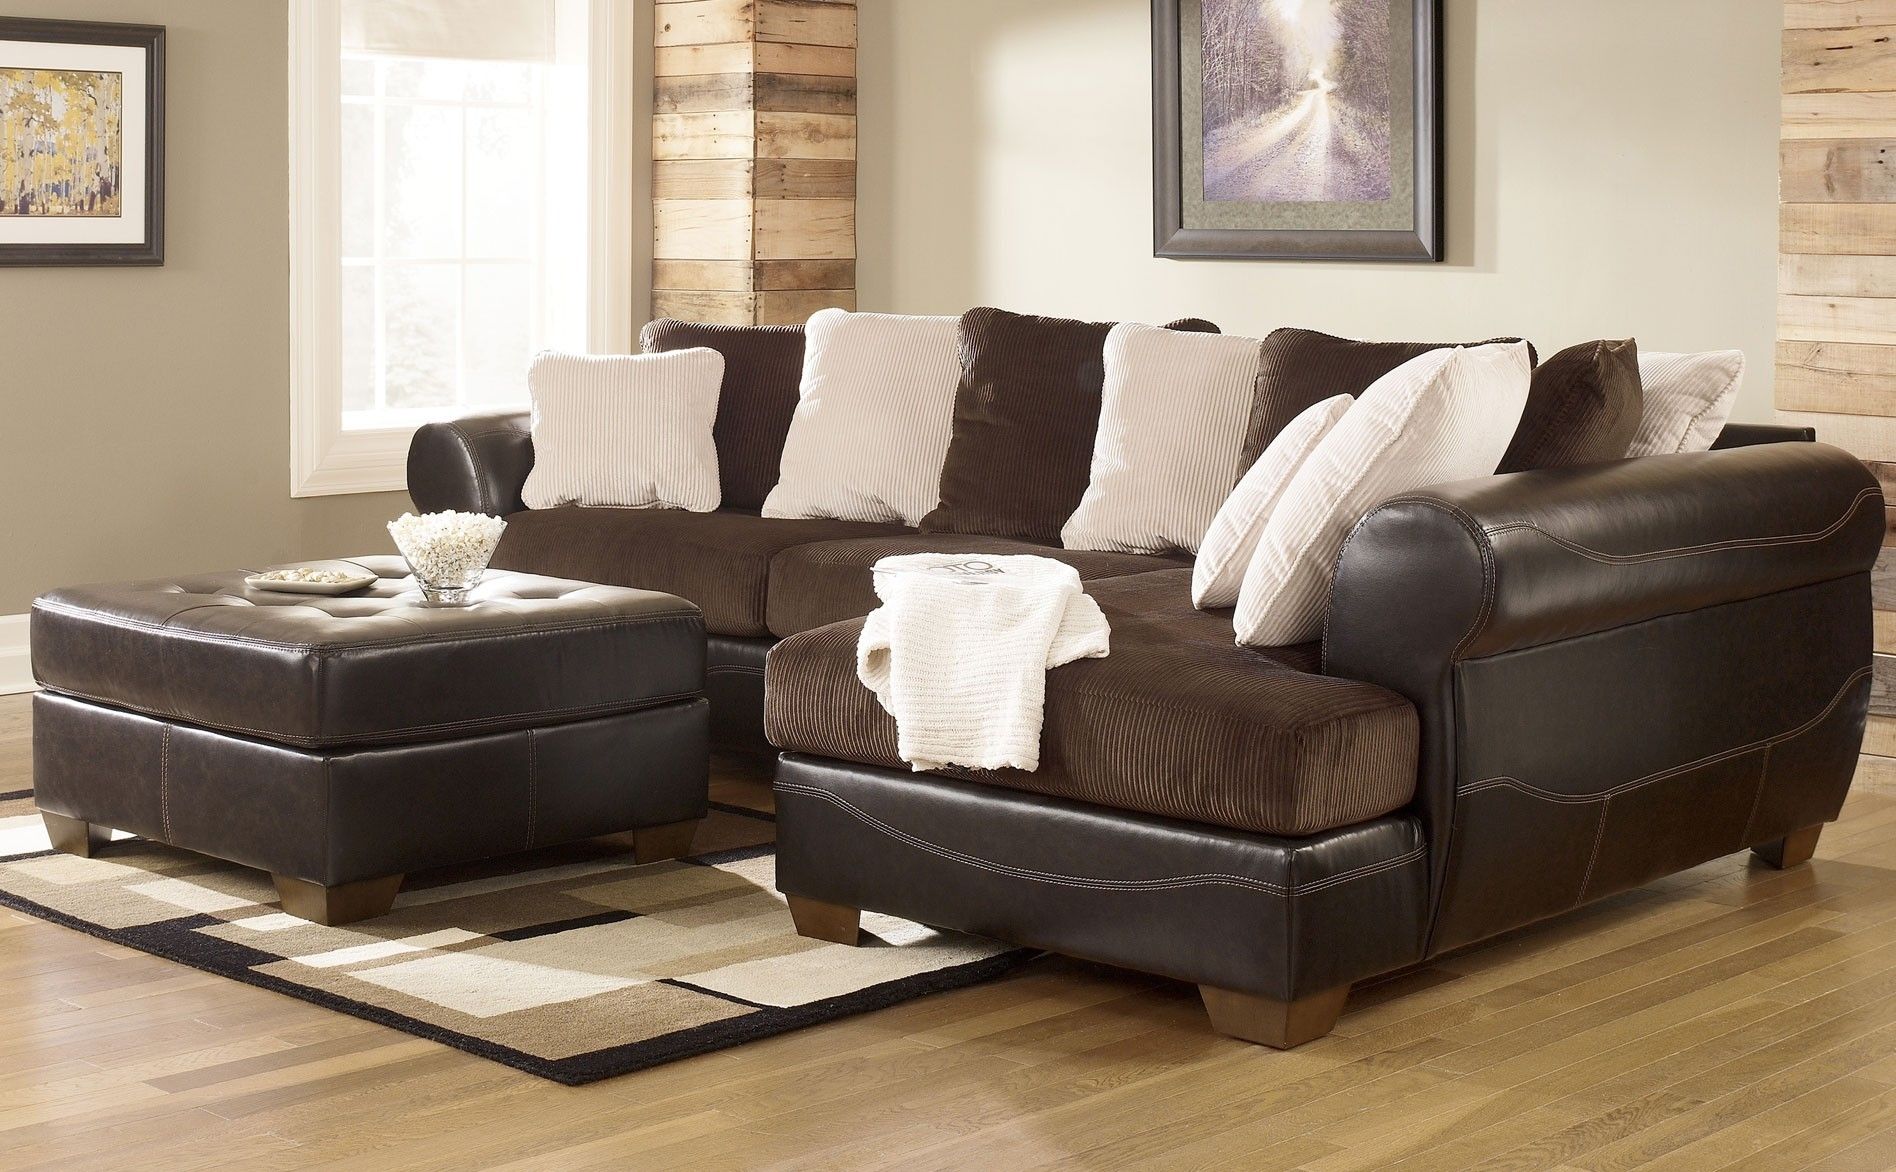 Trend Ashley Furniture Sectional Sleeper Sofa 78 In Sectional Sofas Intended For Tucson Sectional Sofas (View 5 of 10)